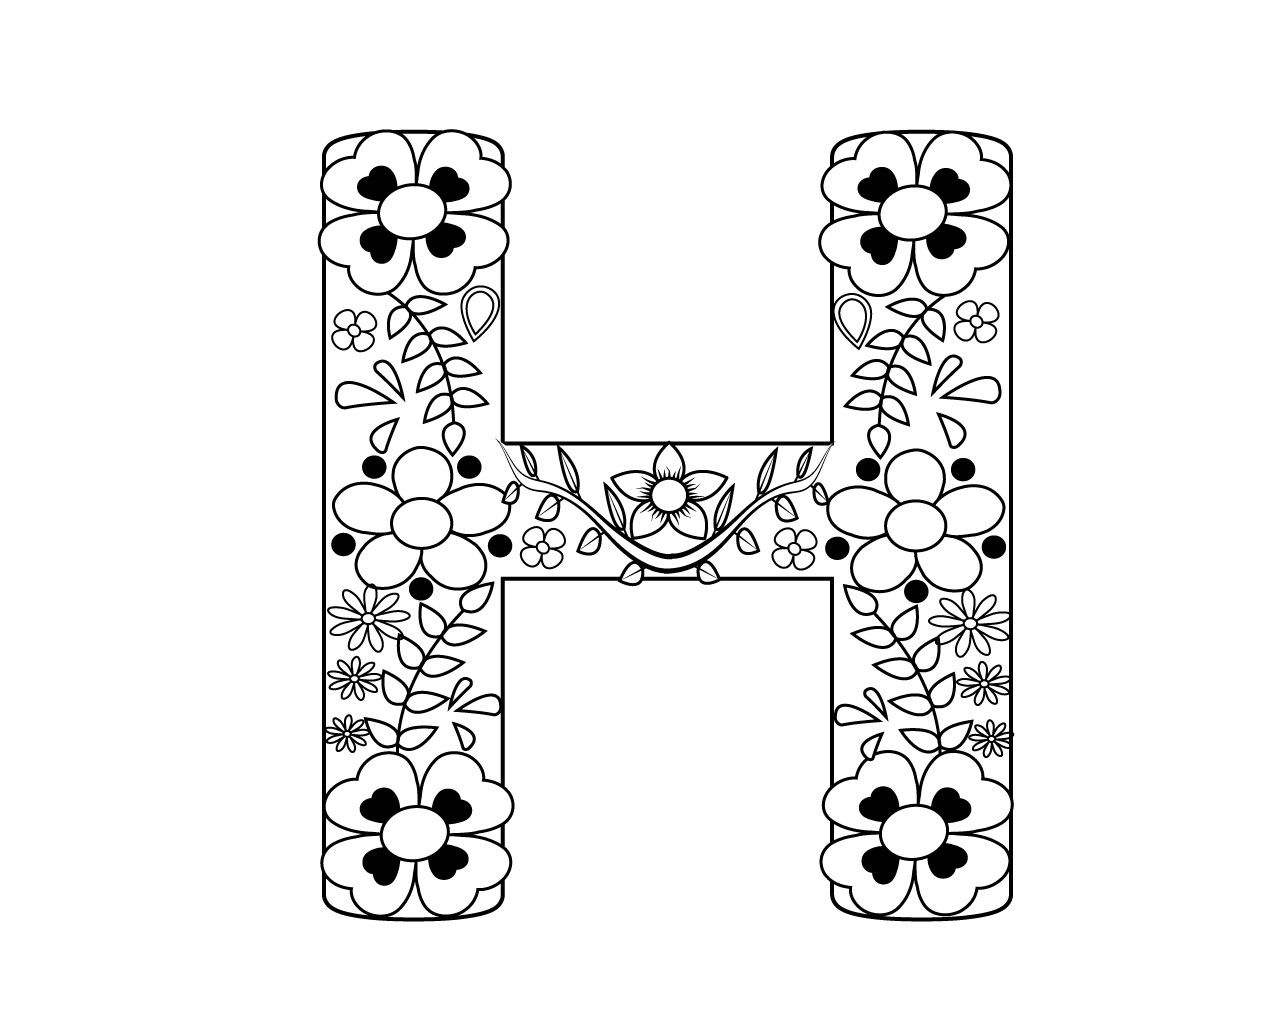 Letter H Coloring Pages for Adults | Coloring pages for kids ...